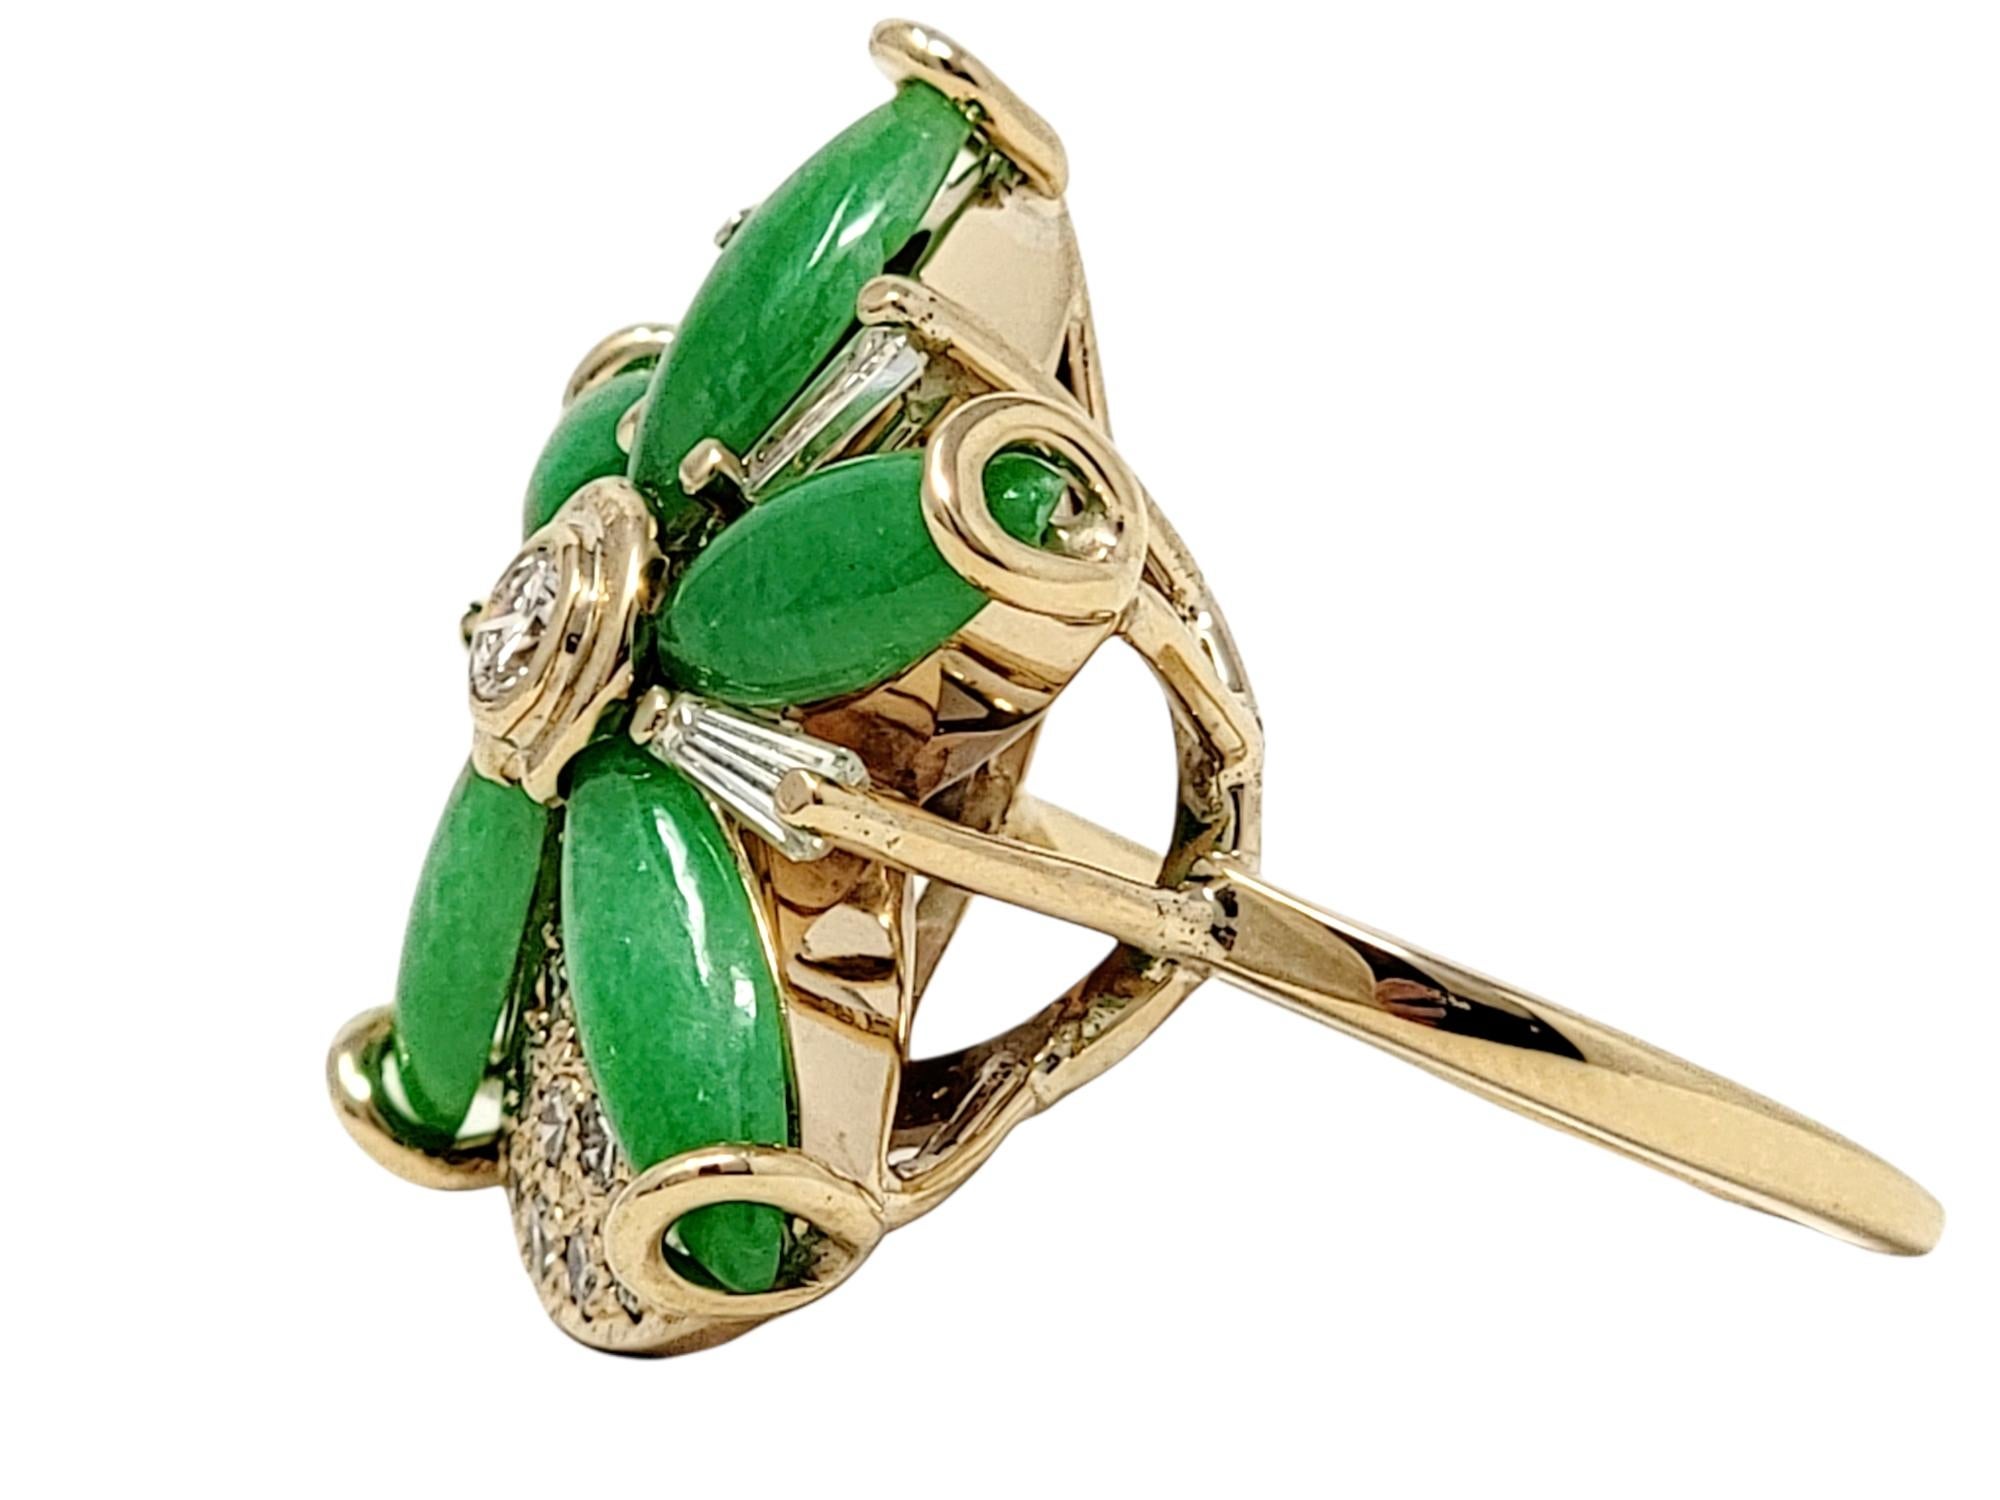 Cabochon Jade and Diamond Flower Cocktail Ring in 14 Karat Yellow Gold 4.50 Carats Total For Sale